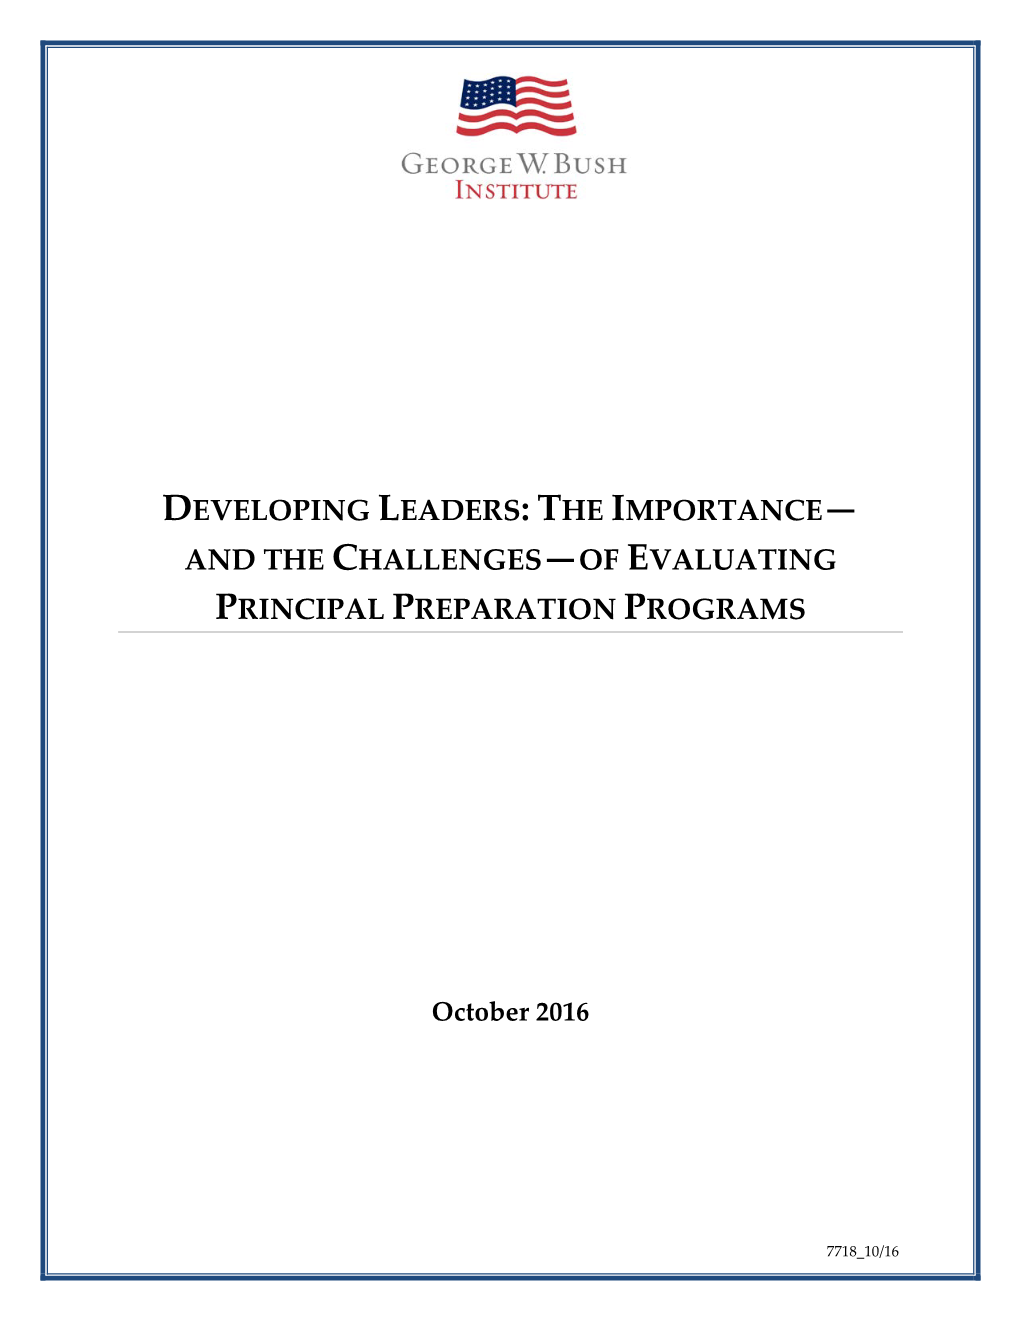 And the Challenges—Of Evaluating Principal Preparation Programs